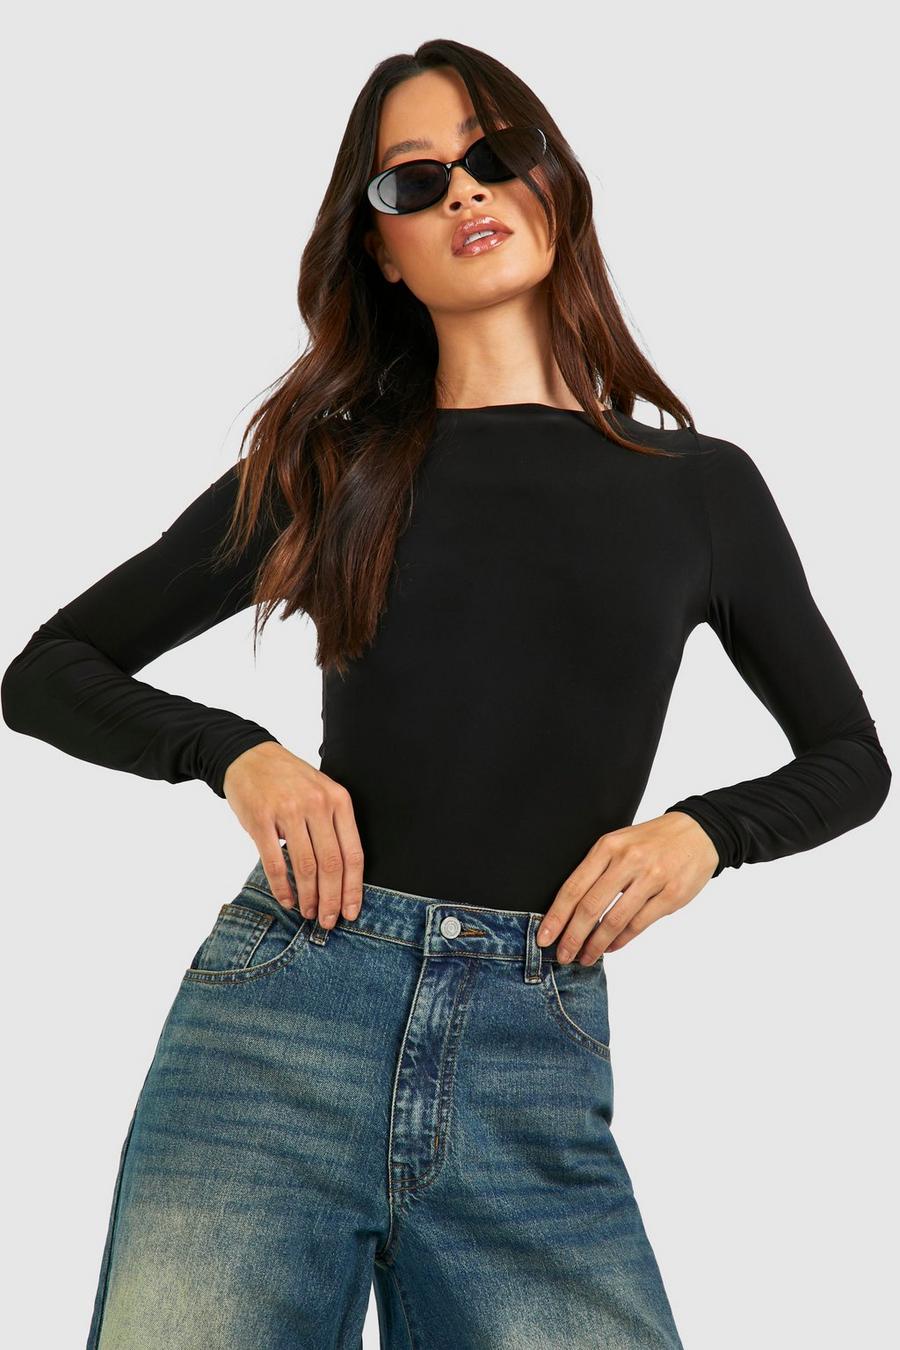 ASOS 4505 Tall seamless acid ruched bum leggings and long sleeve scoop neck  in navy